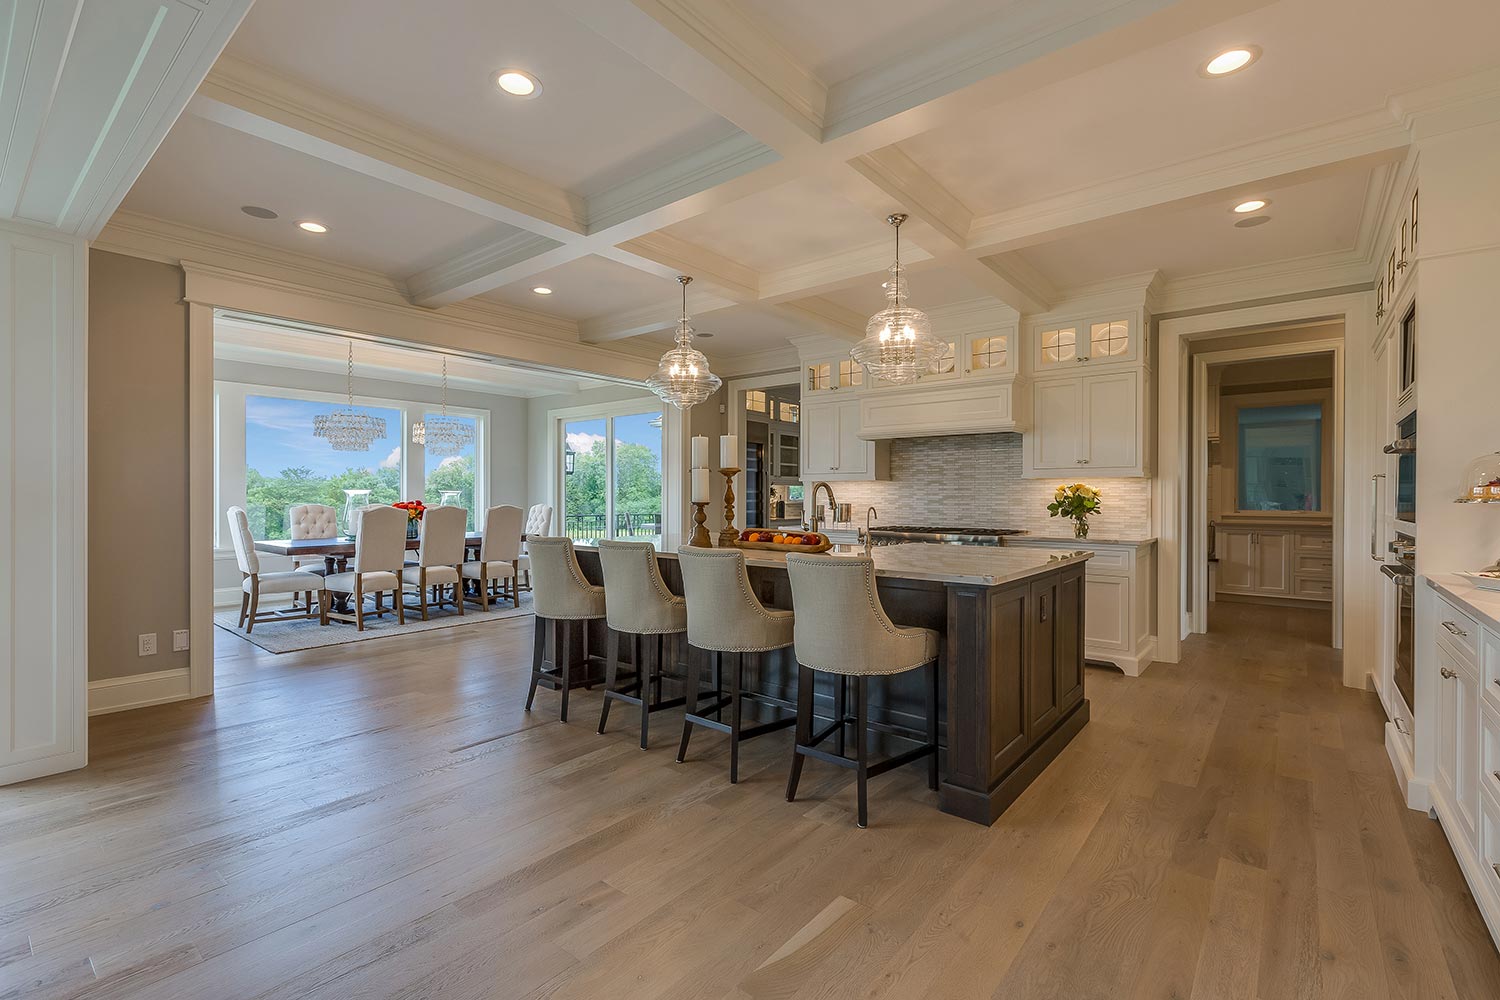 Open floor plan kitchen with coffered ceiling